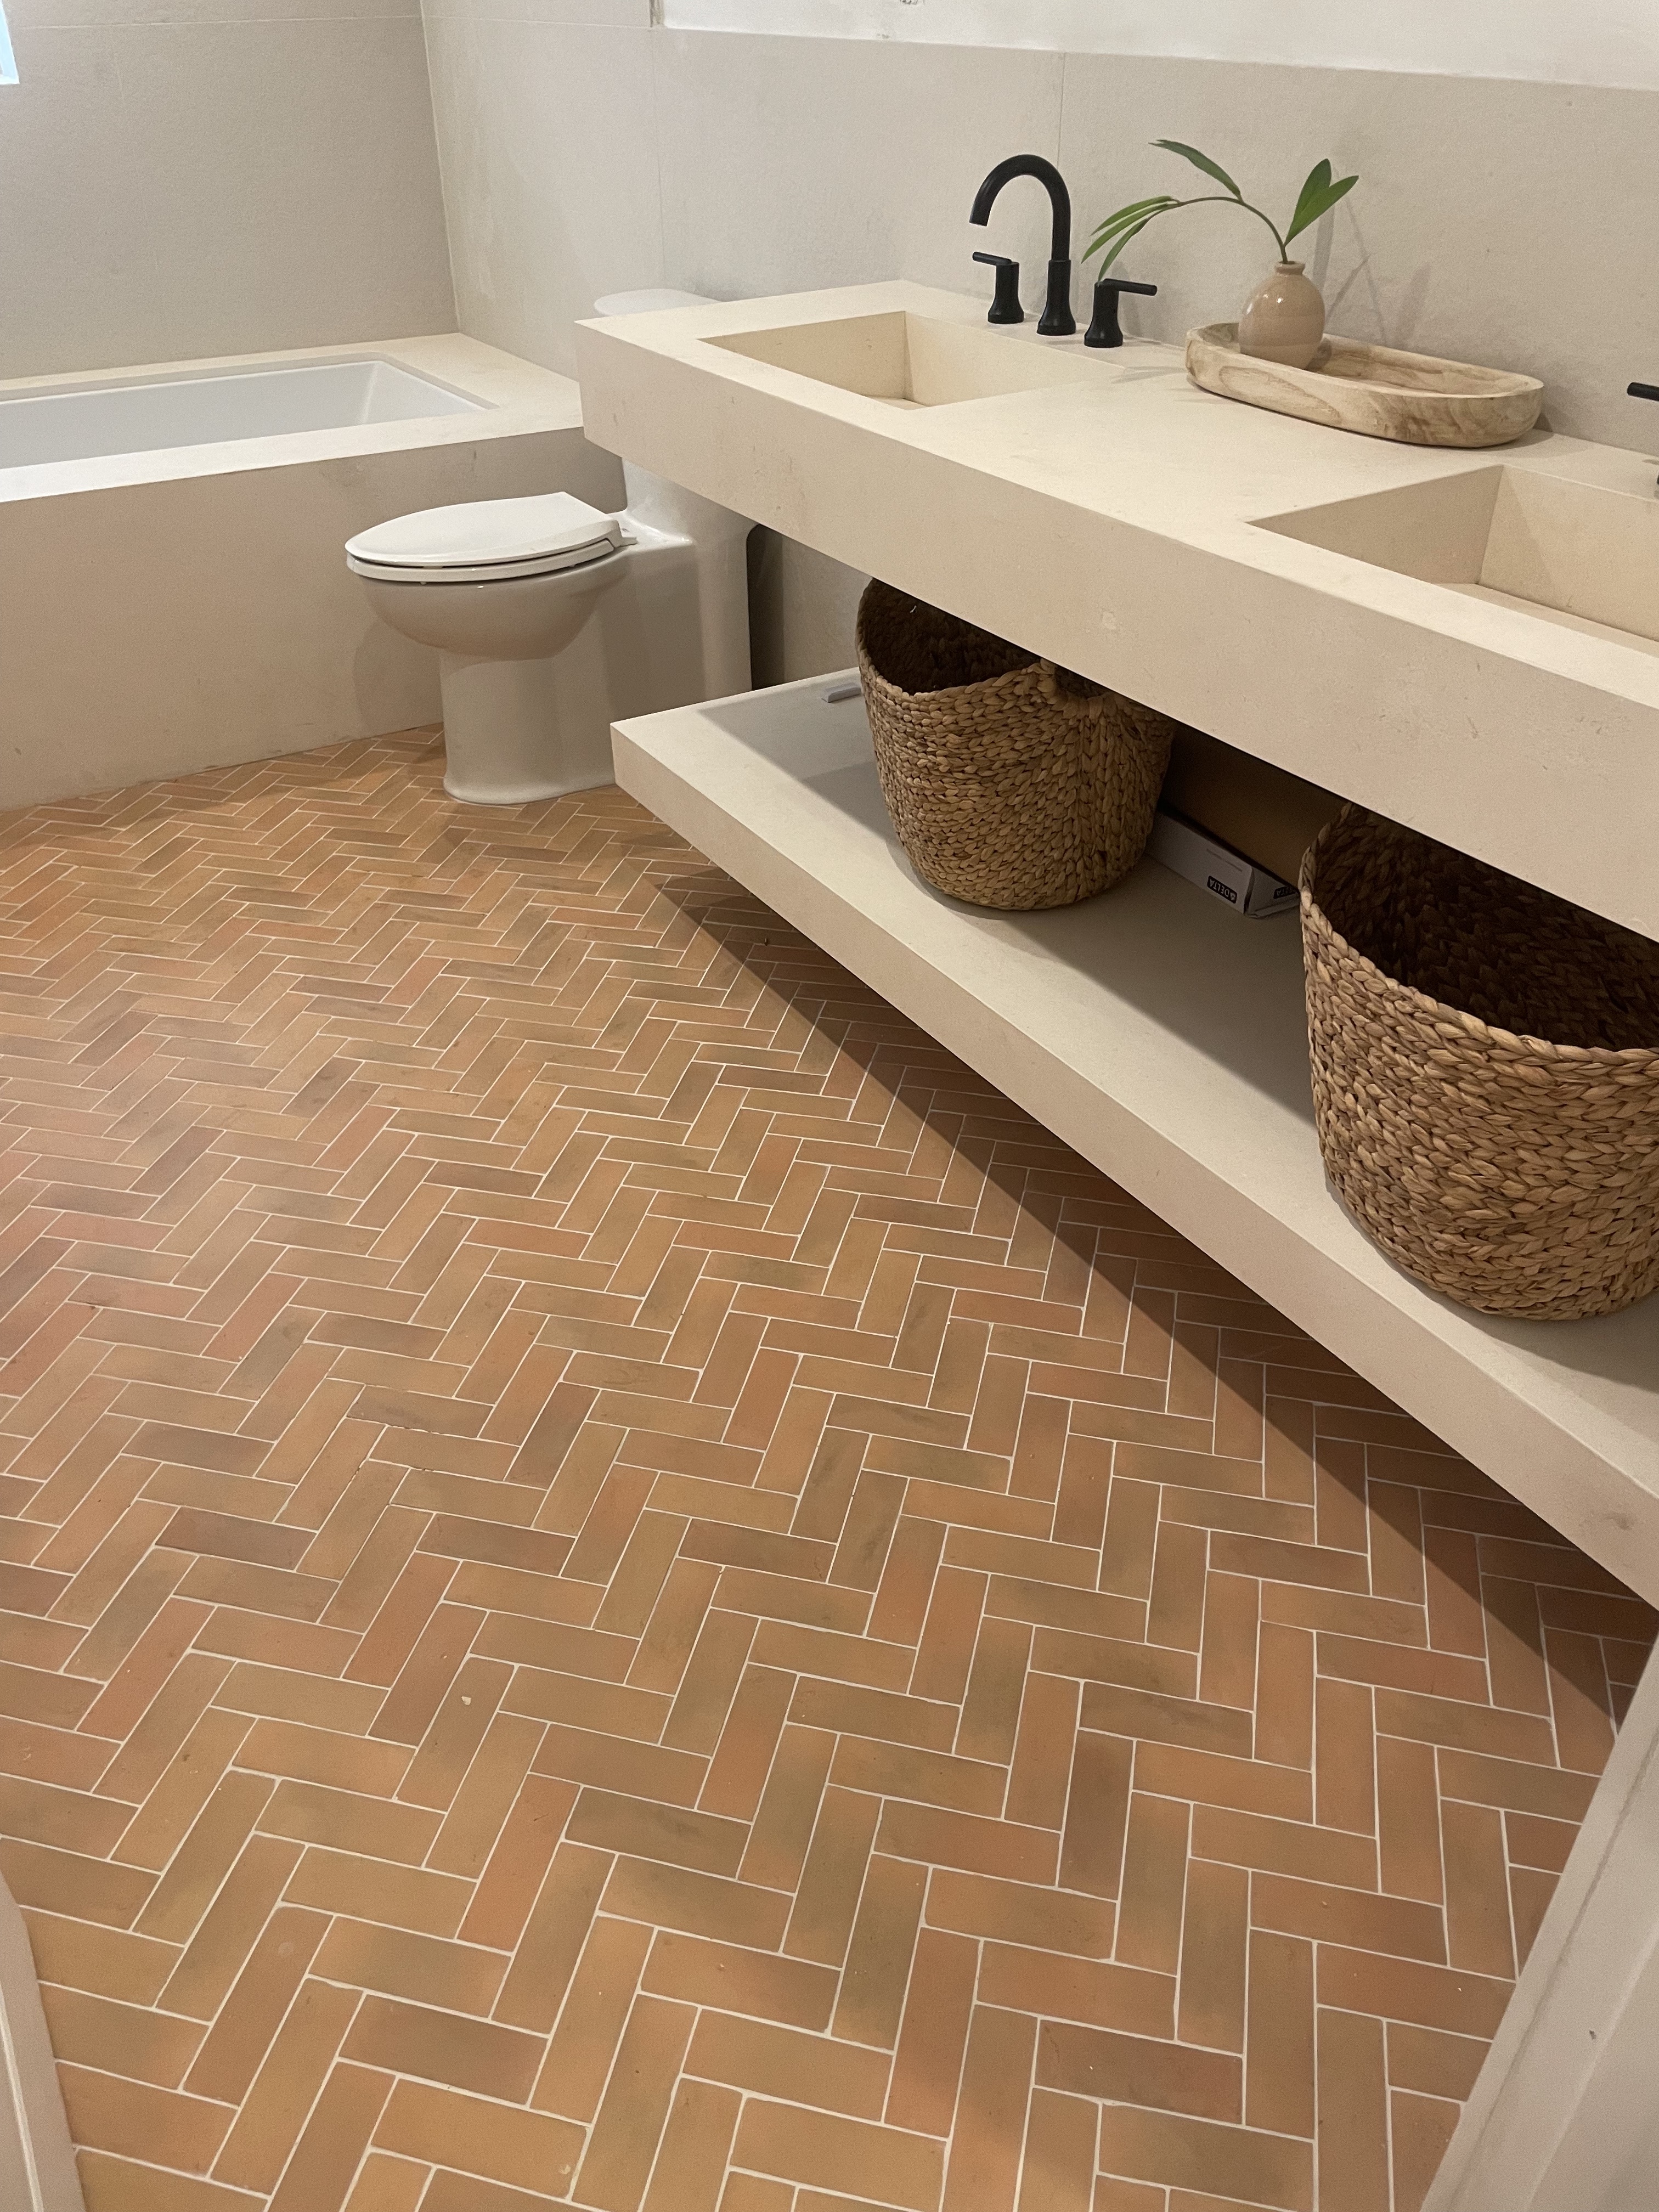 A Stunning Herringbone Floor Remodel by Anchor Construction